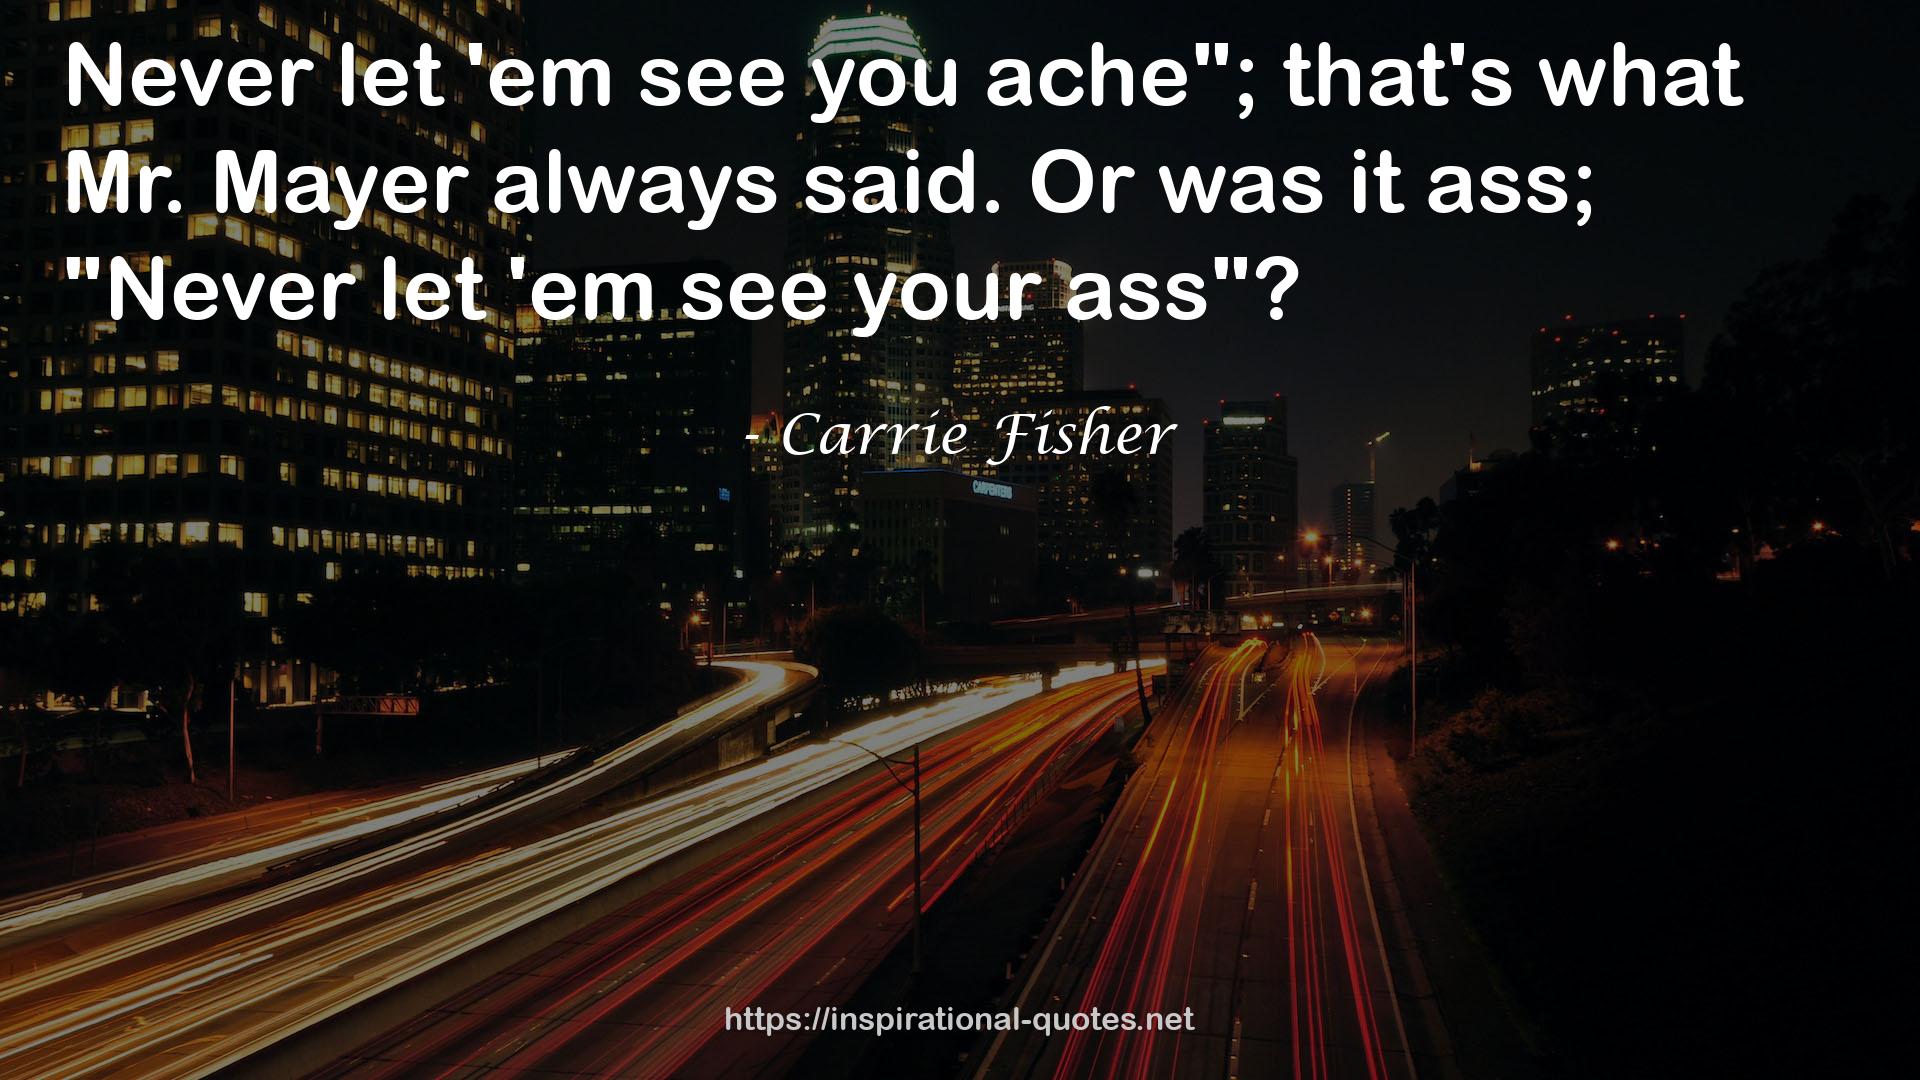 Carrie Fisher QUOTES